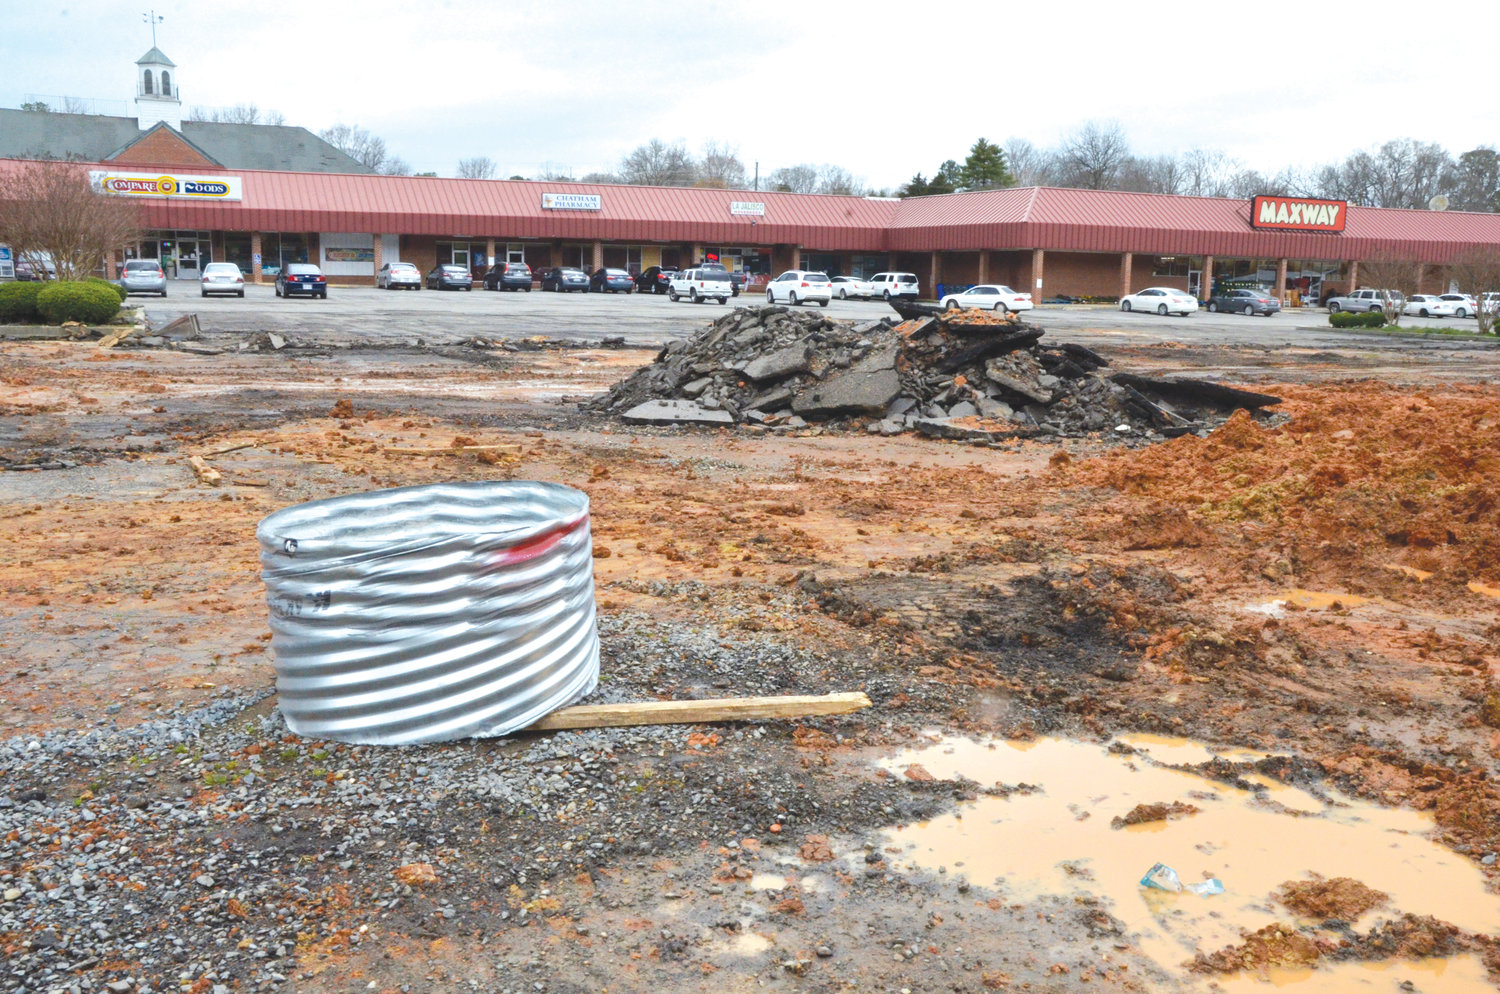 Flooding has been a continual issue in the Maxway parking lot for decades. New culverts are being installed and the parking lot will be repaved at the shopping center owner's expense.